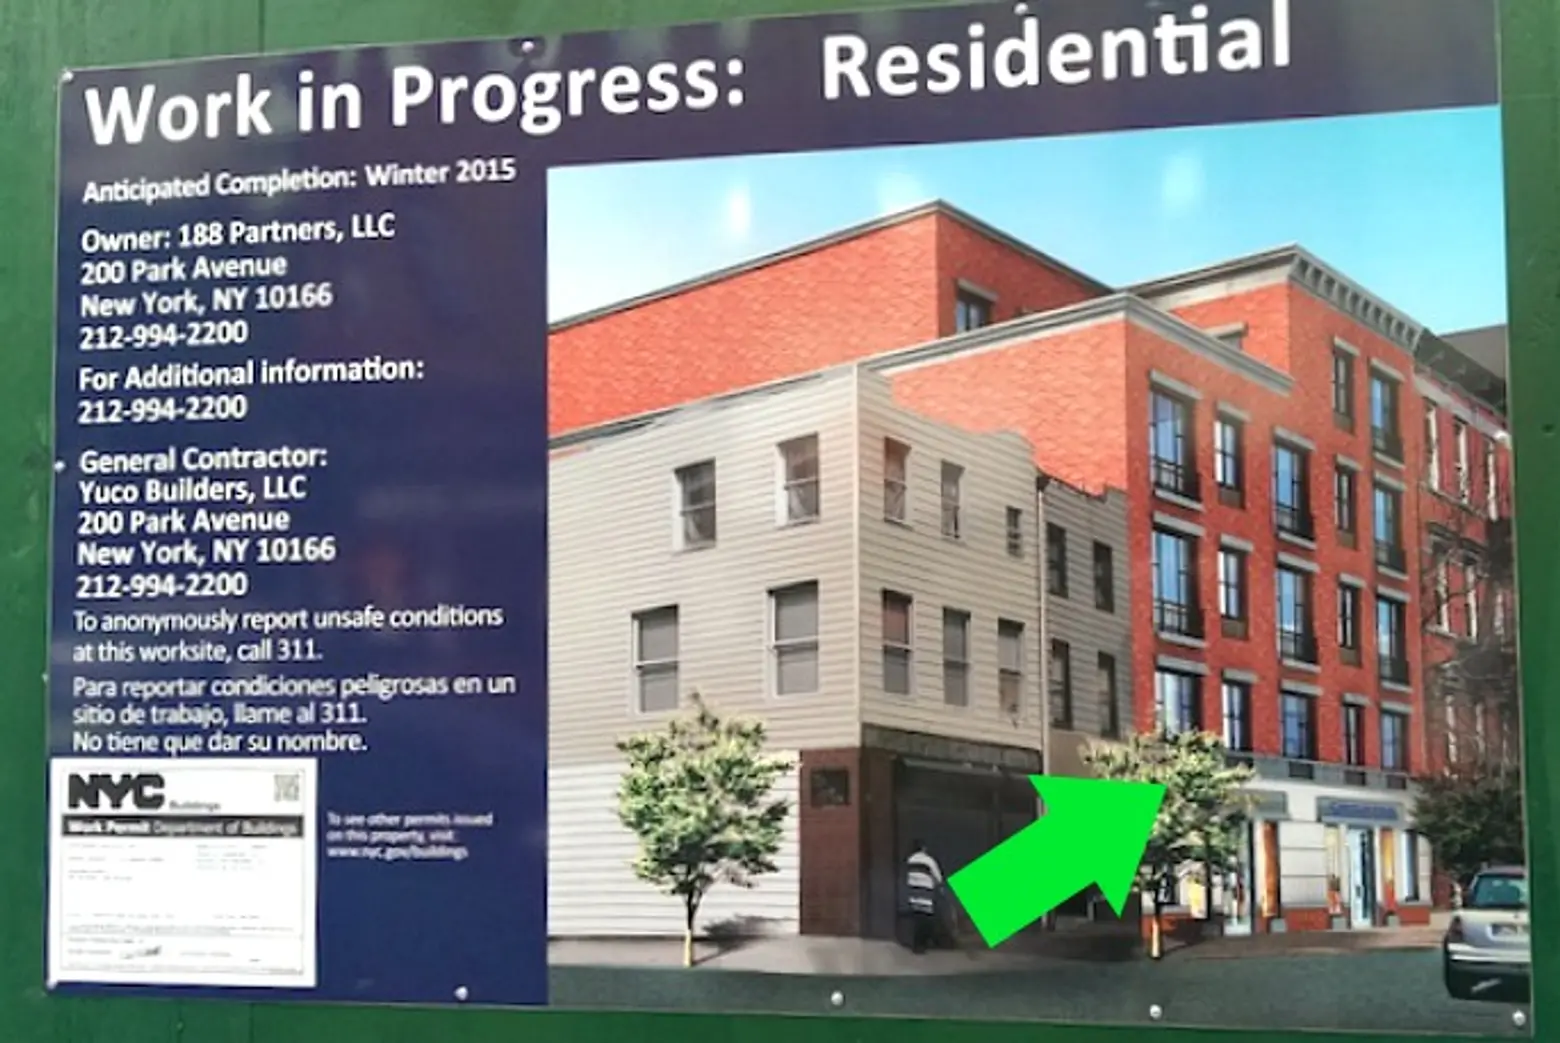 Apply for 30 Affordable Units in Three Williamsburg Buildings, Starting at $532/Month